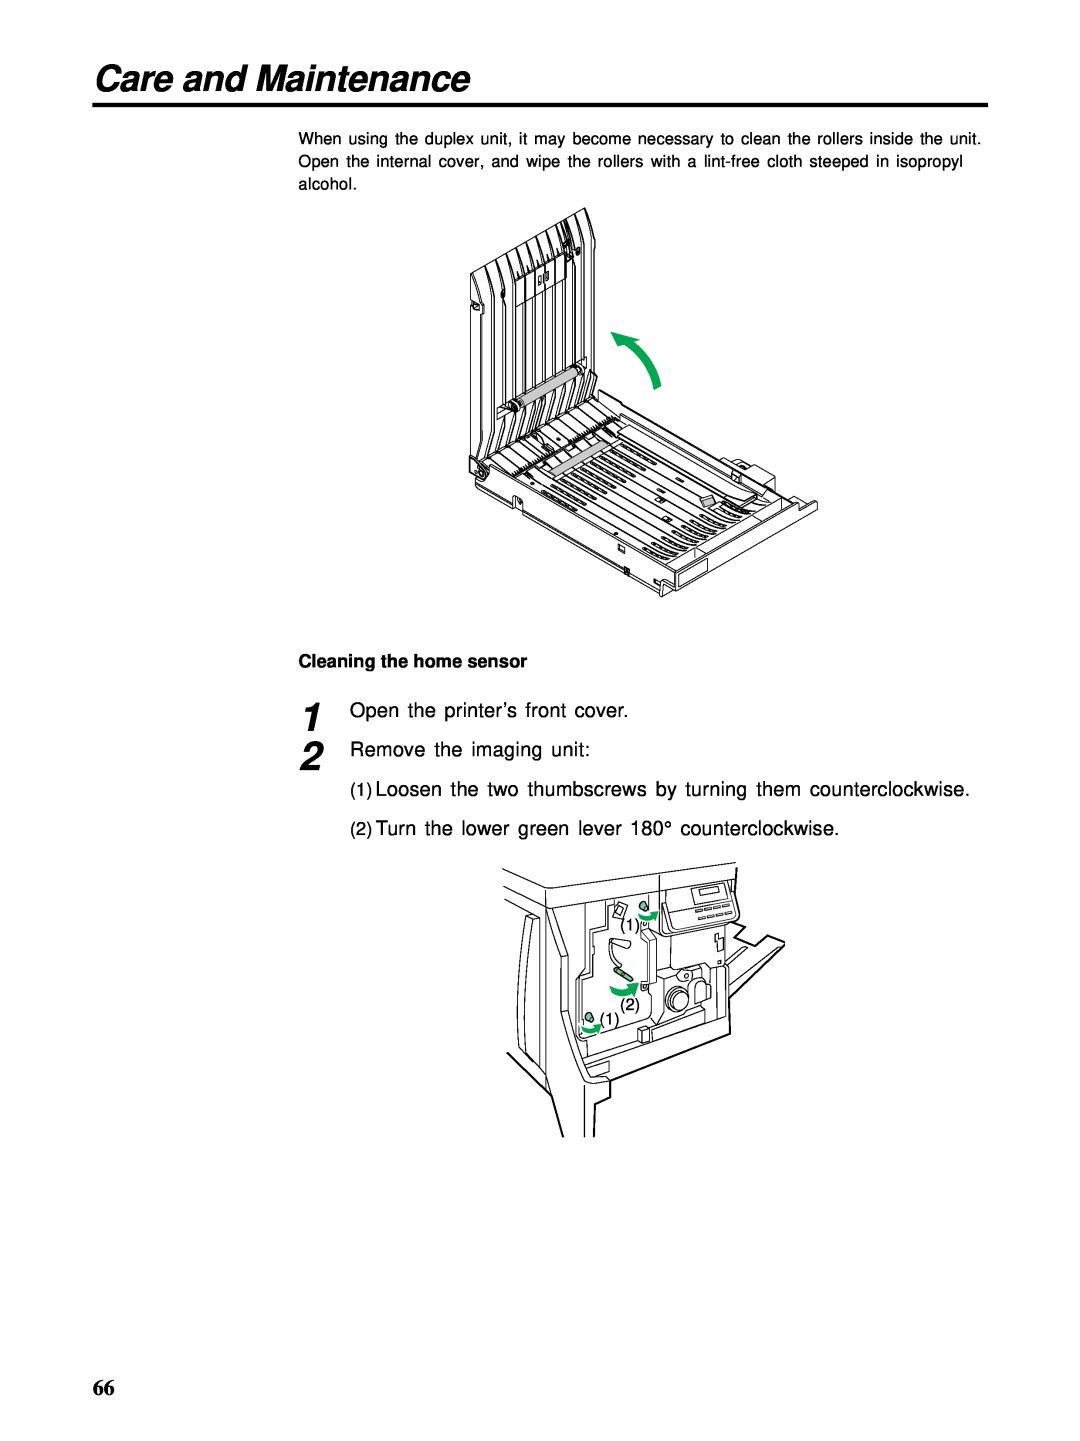 HP Ci 1100 manual Care and Maintenance, Open the printer’s front cover Remove the imaging unit, Cleaning the home sensor 